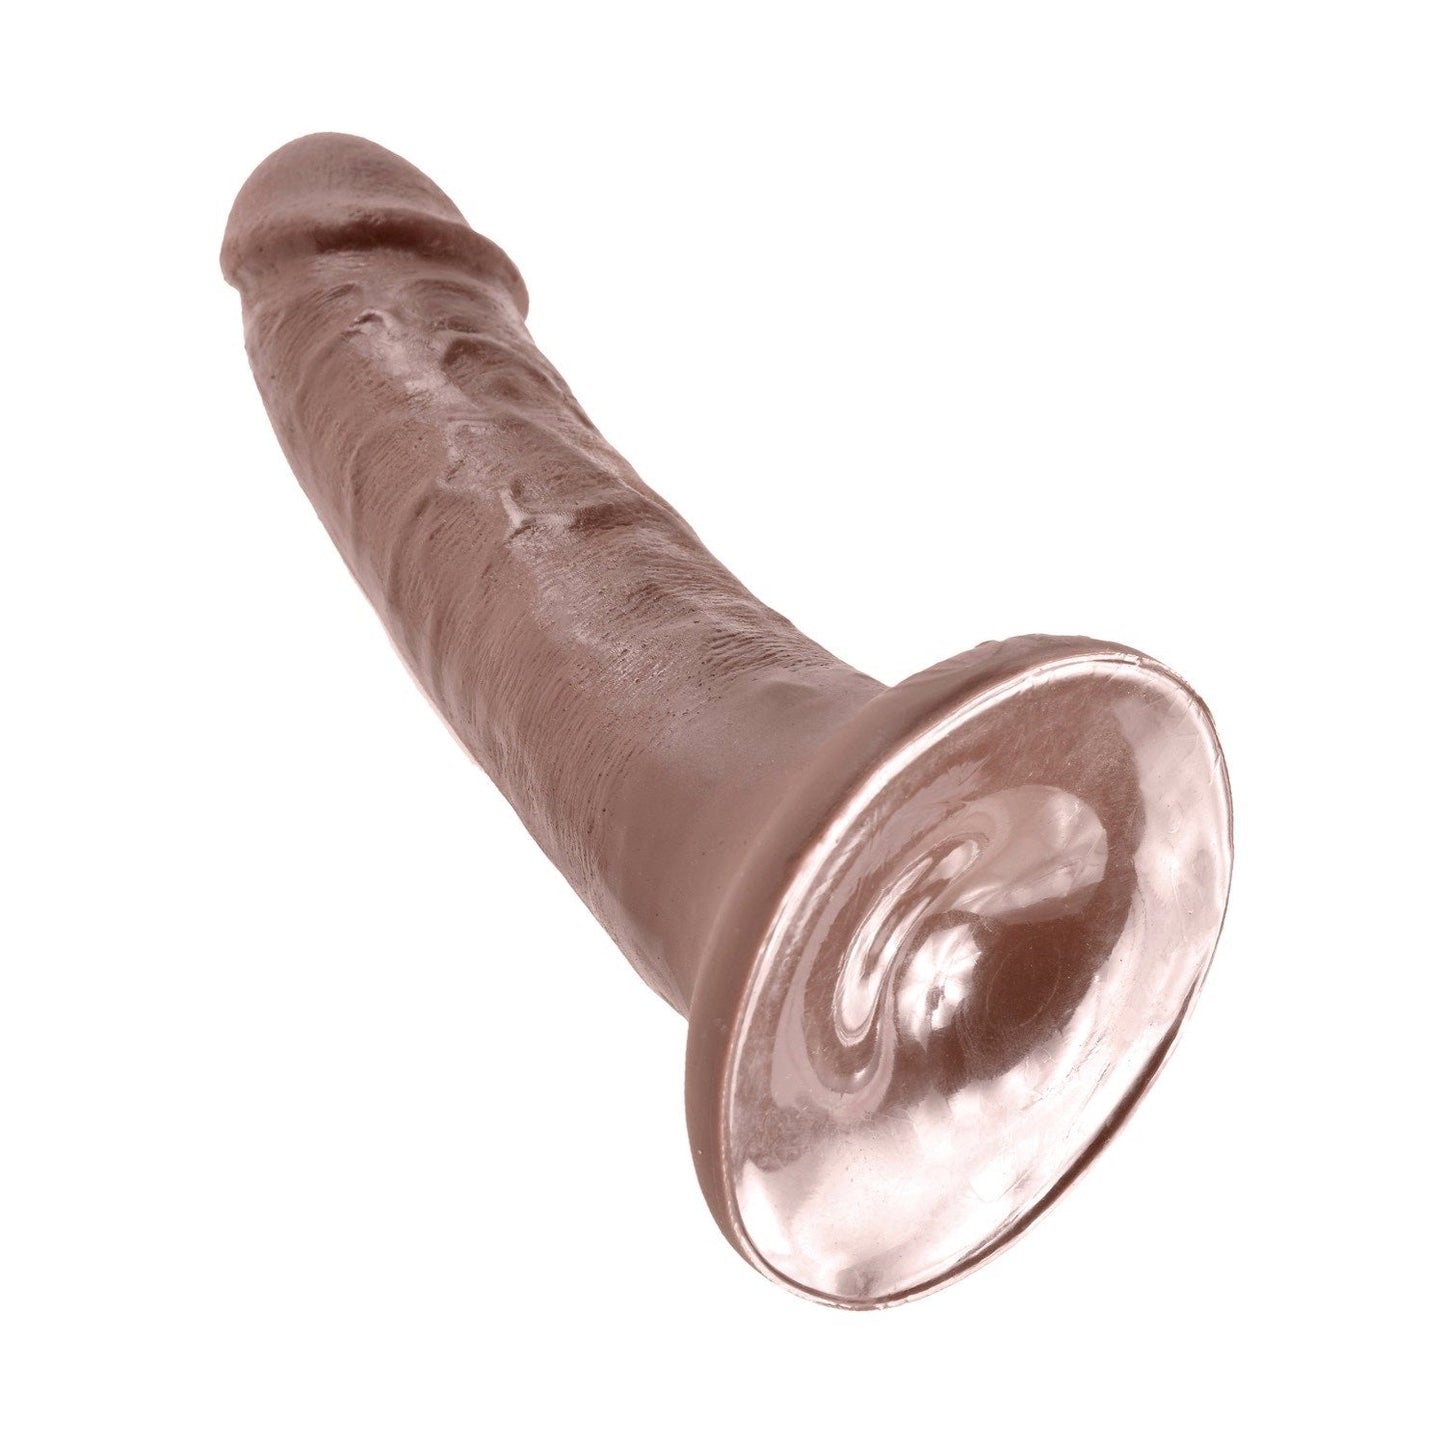 6" Cock - Brown 15.2 cm (6") Dong